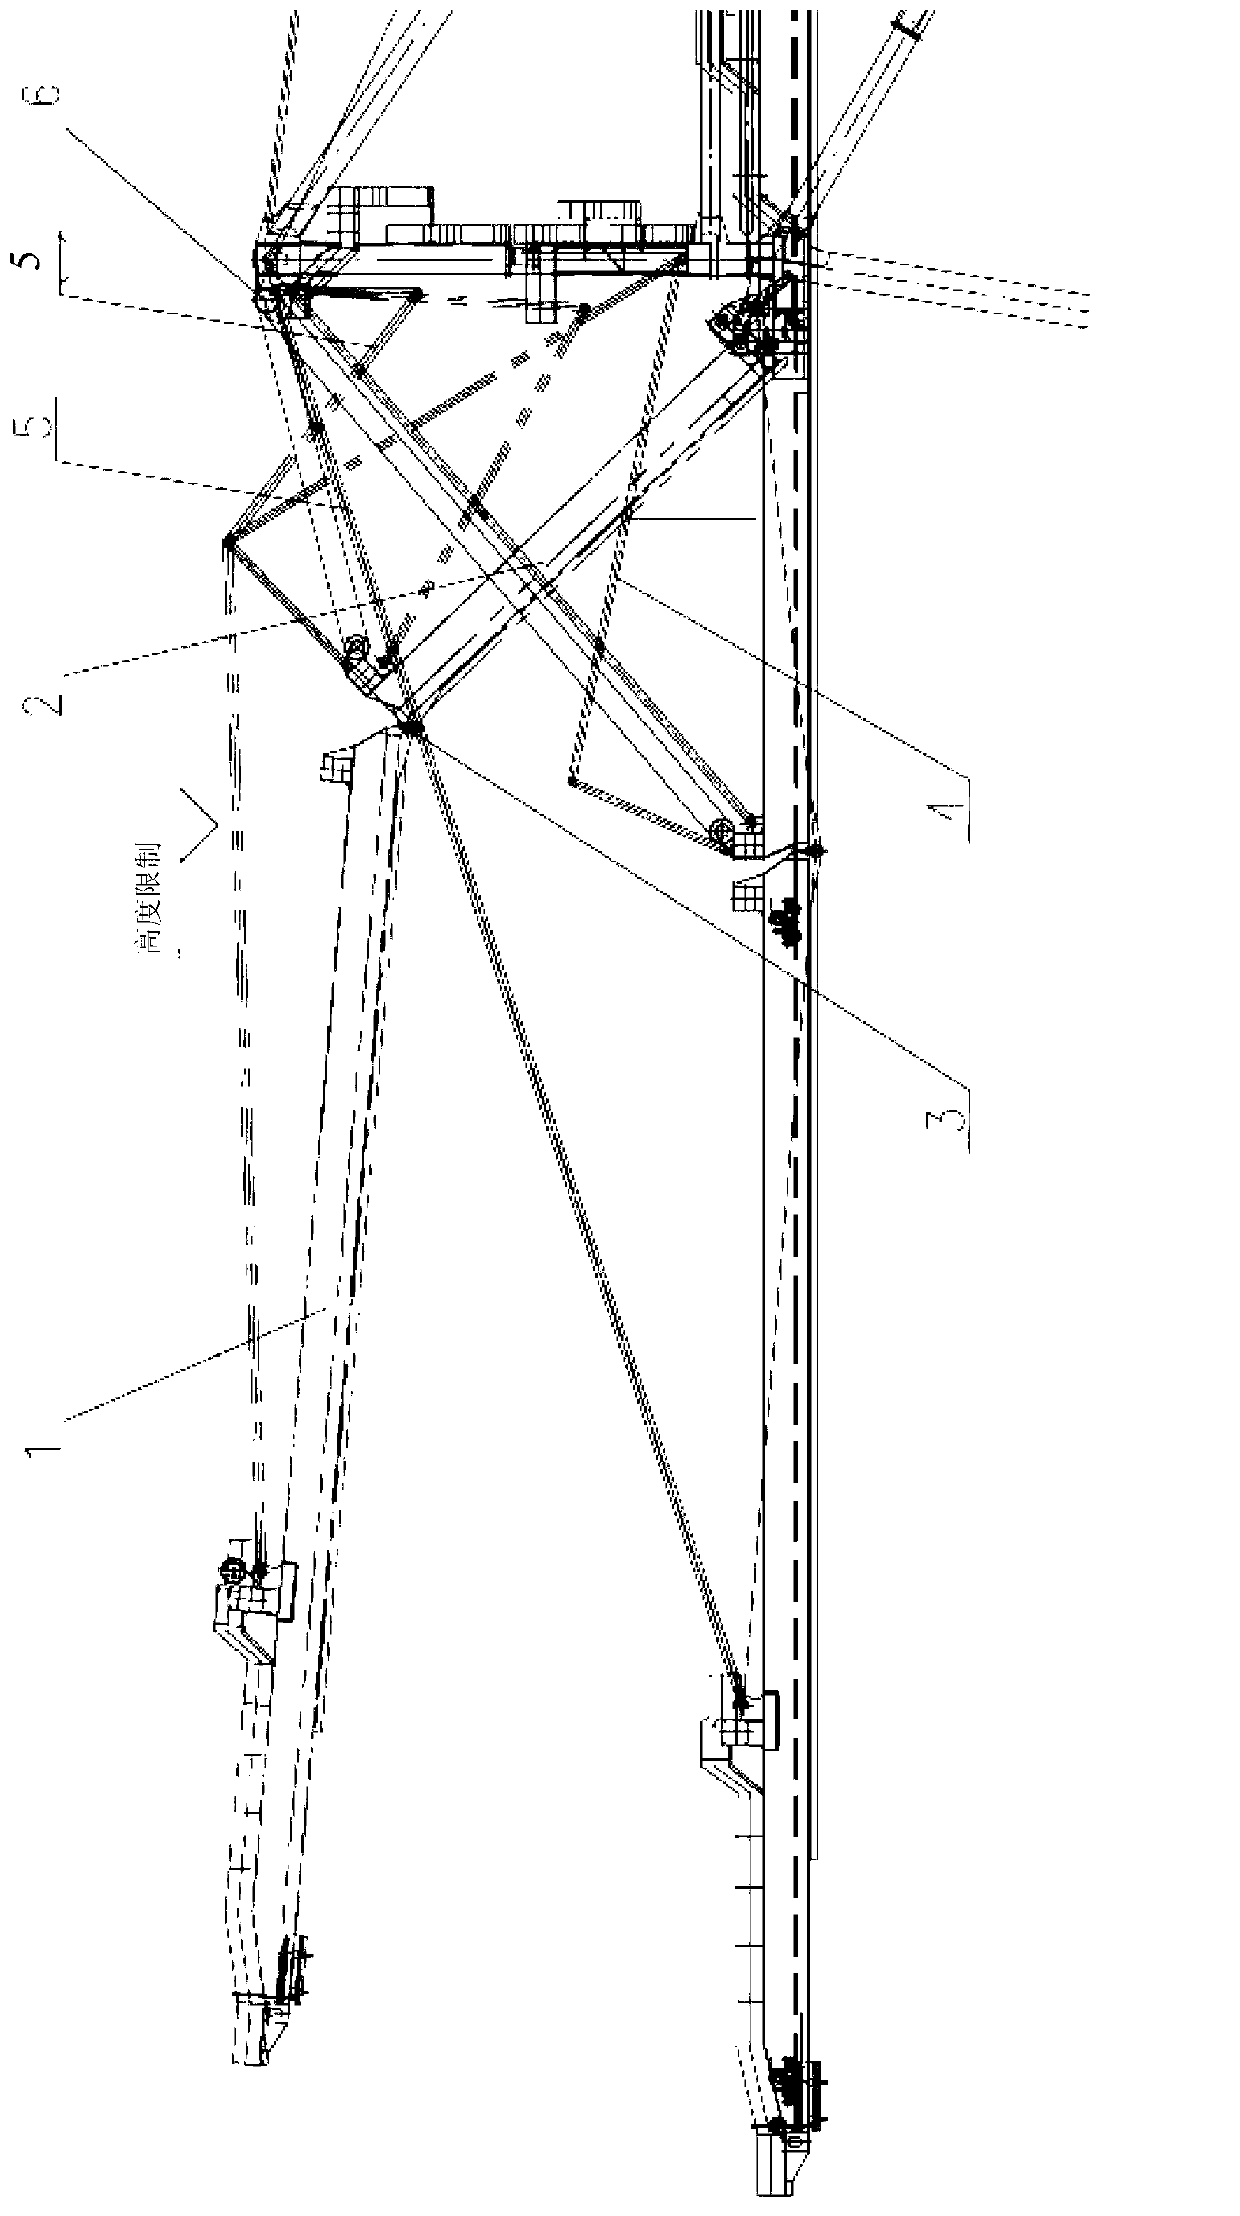 Crane provided with folding arm and beams